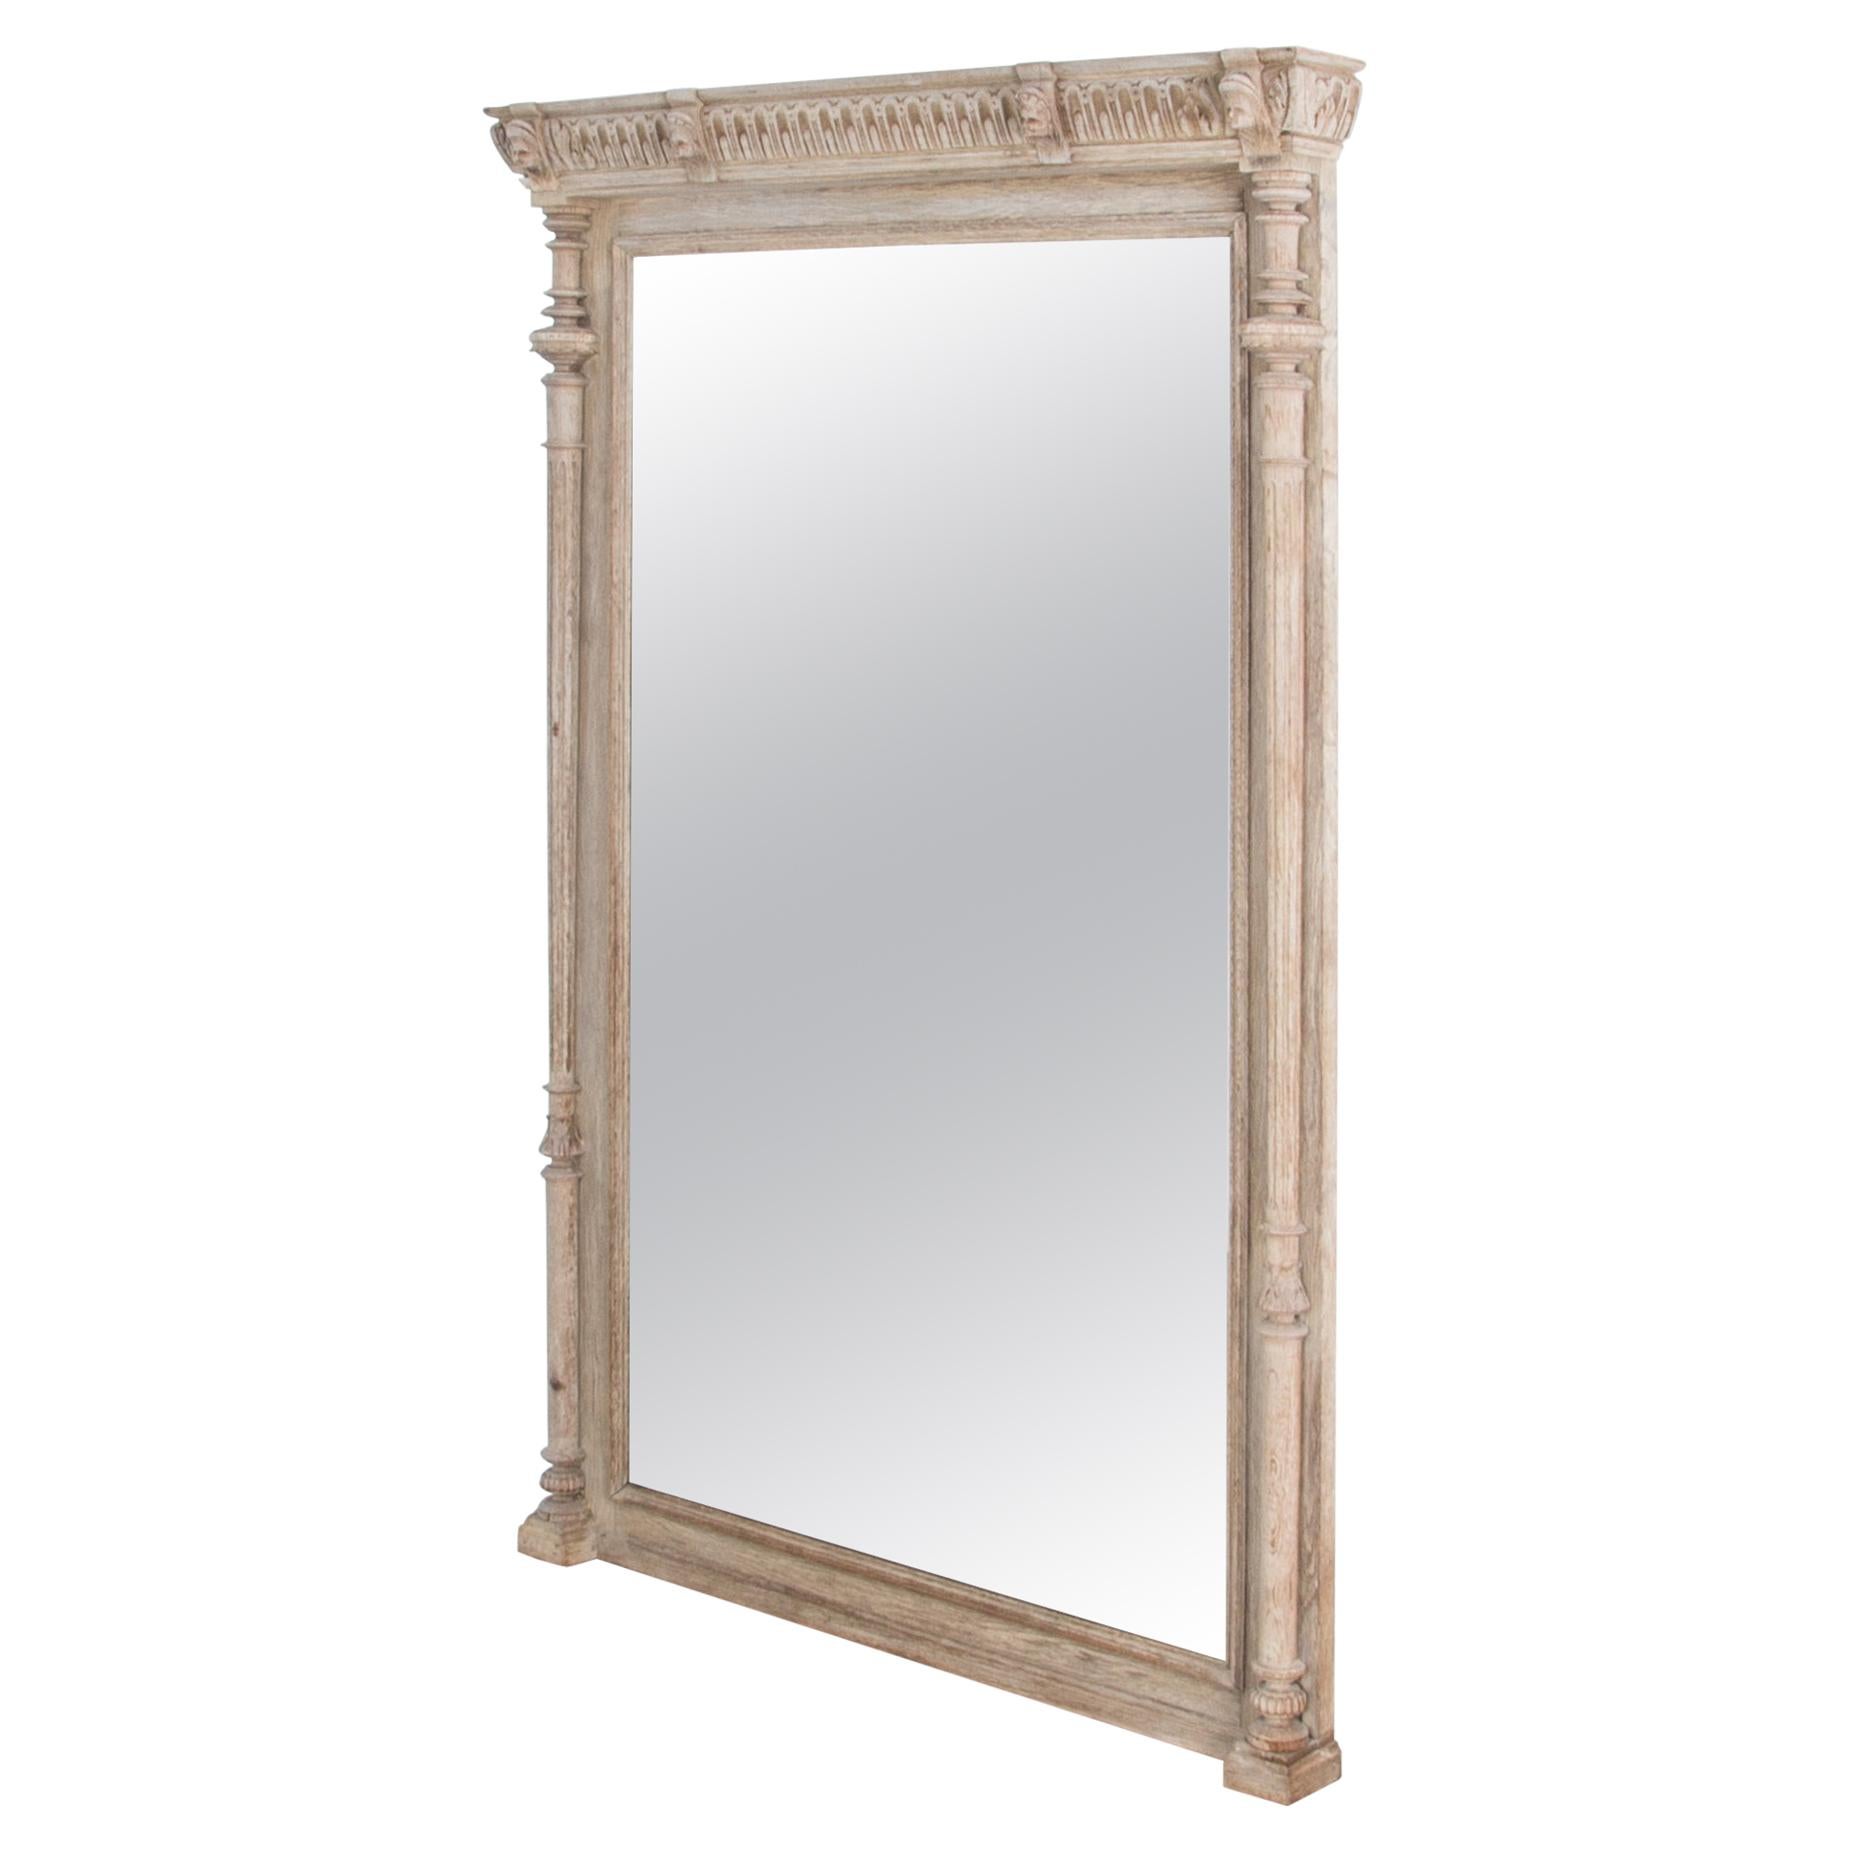 Antique Floor Mirror with Carved Wooden Frame